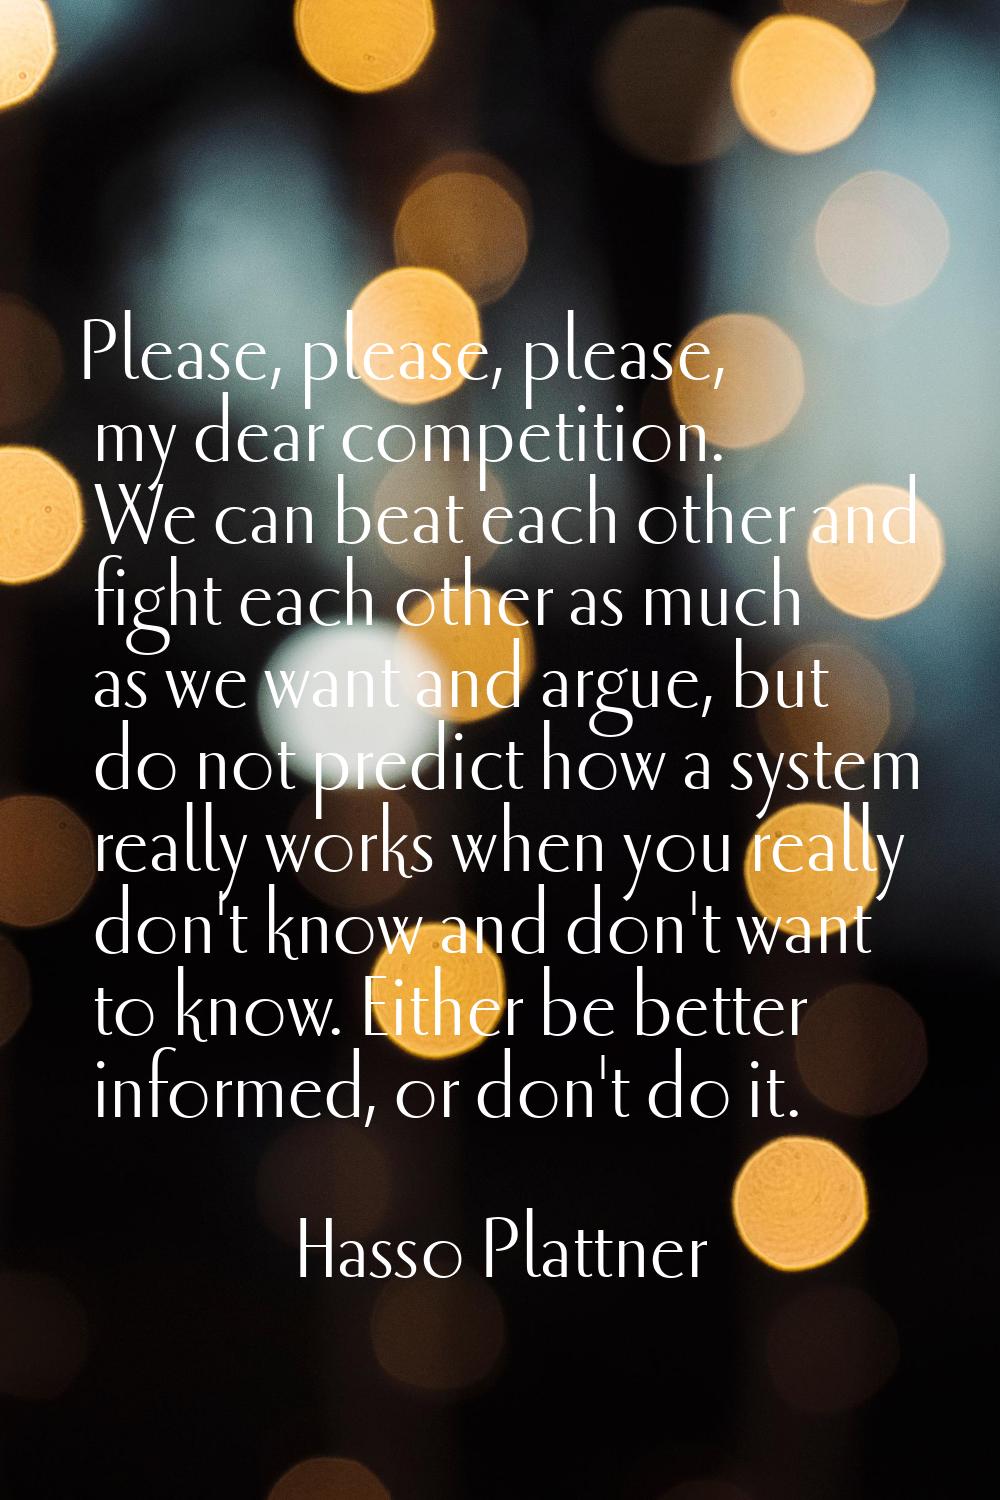 Please, please, please, my dear competition. We can beat each other and fight each other as much as